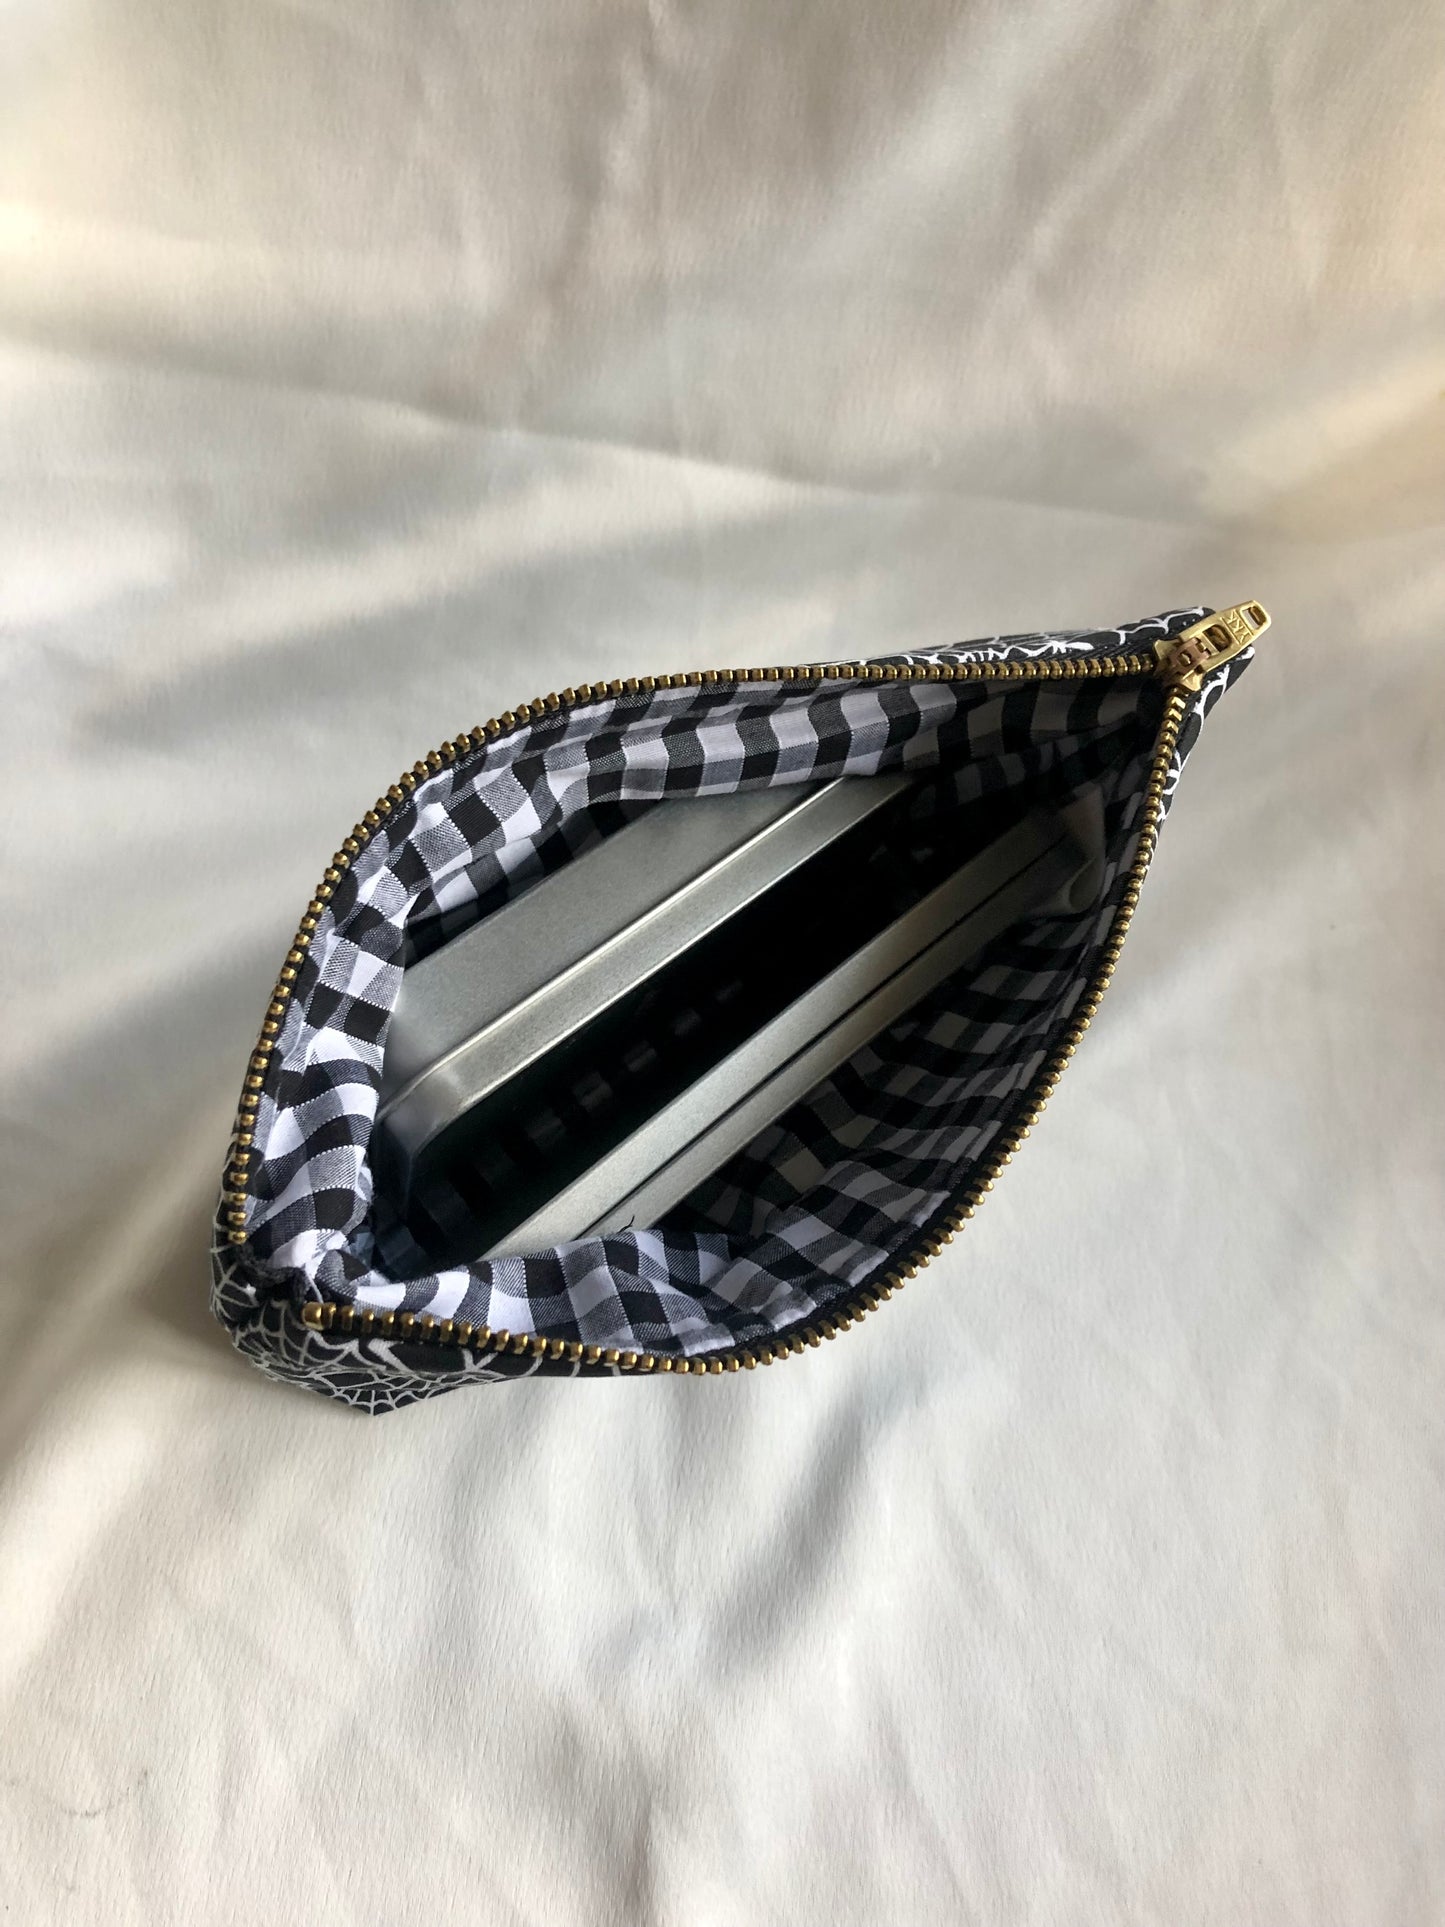 Black with white spiderwebs zipped pouch/make up bag